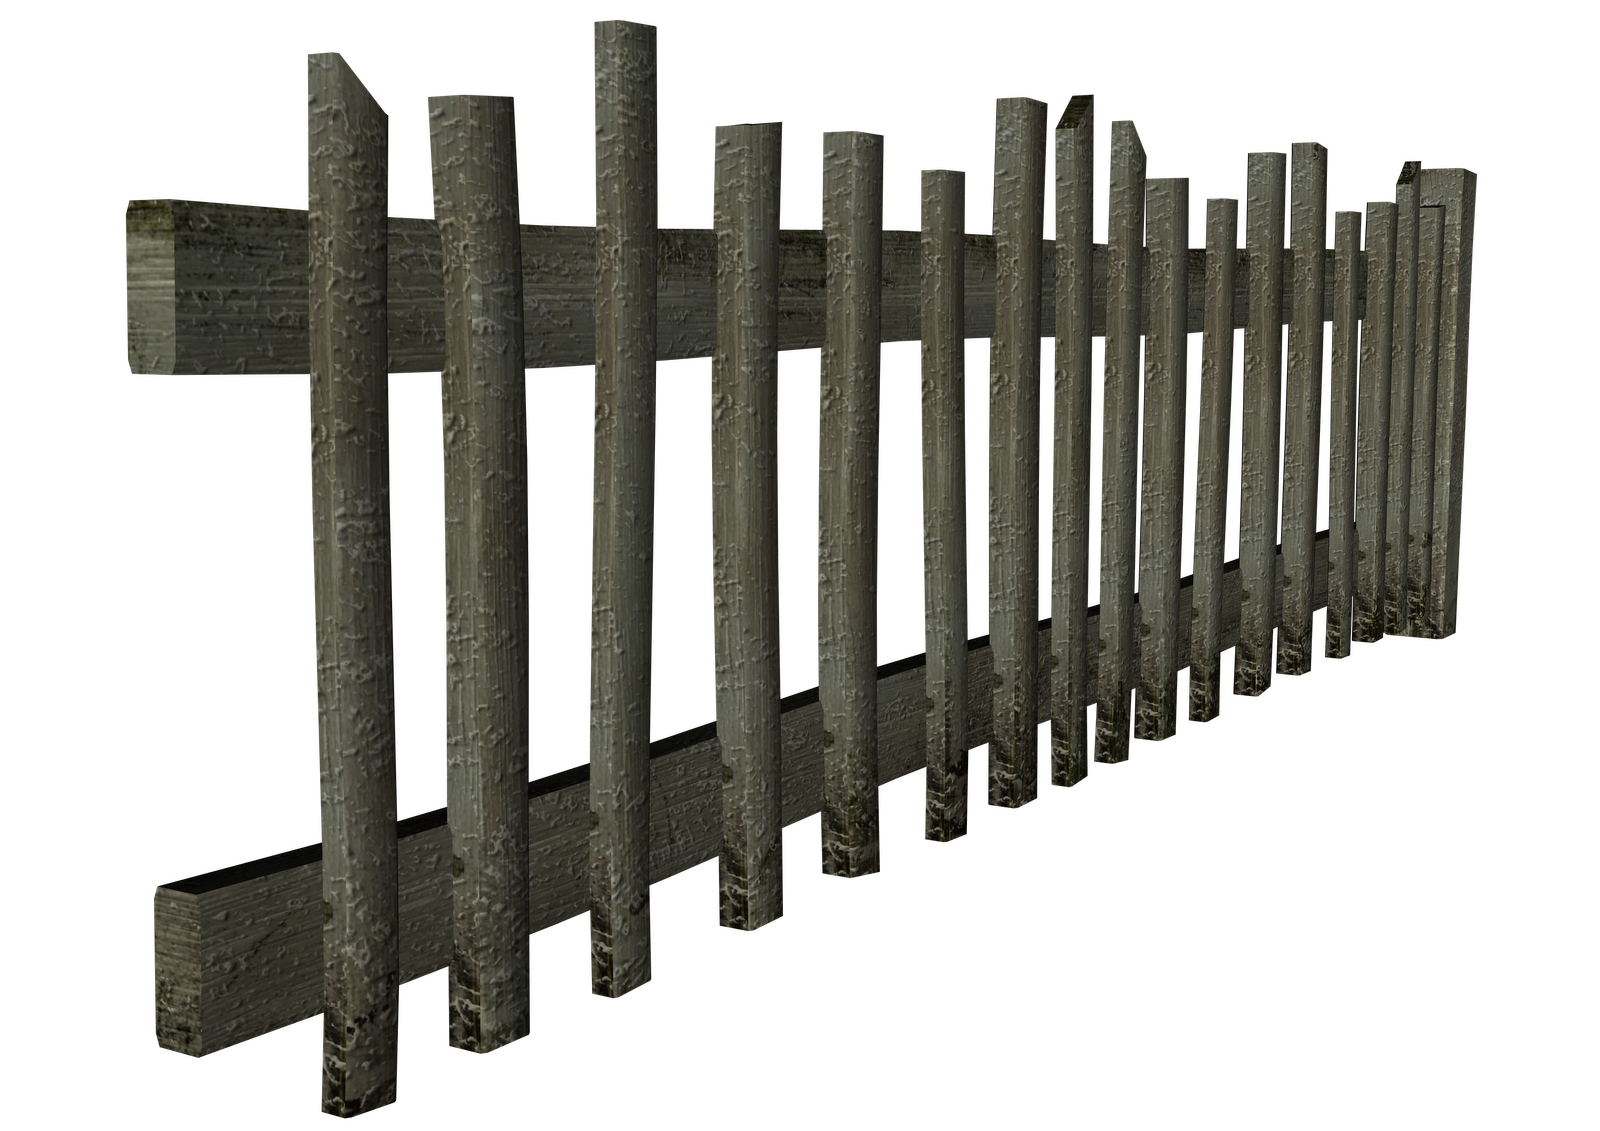 Free High Resolution graphics and clip art: objects fence png